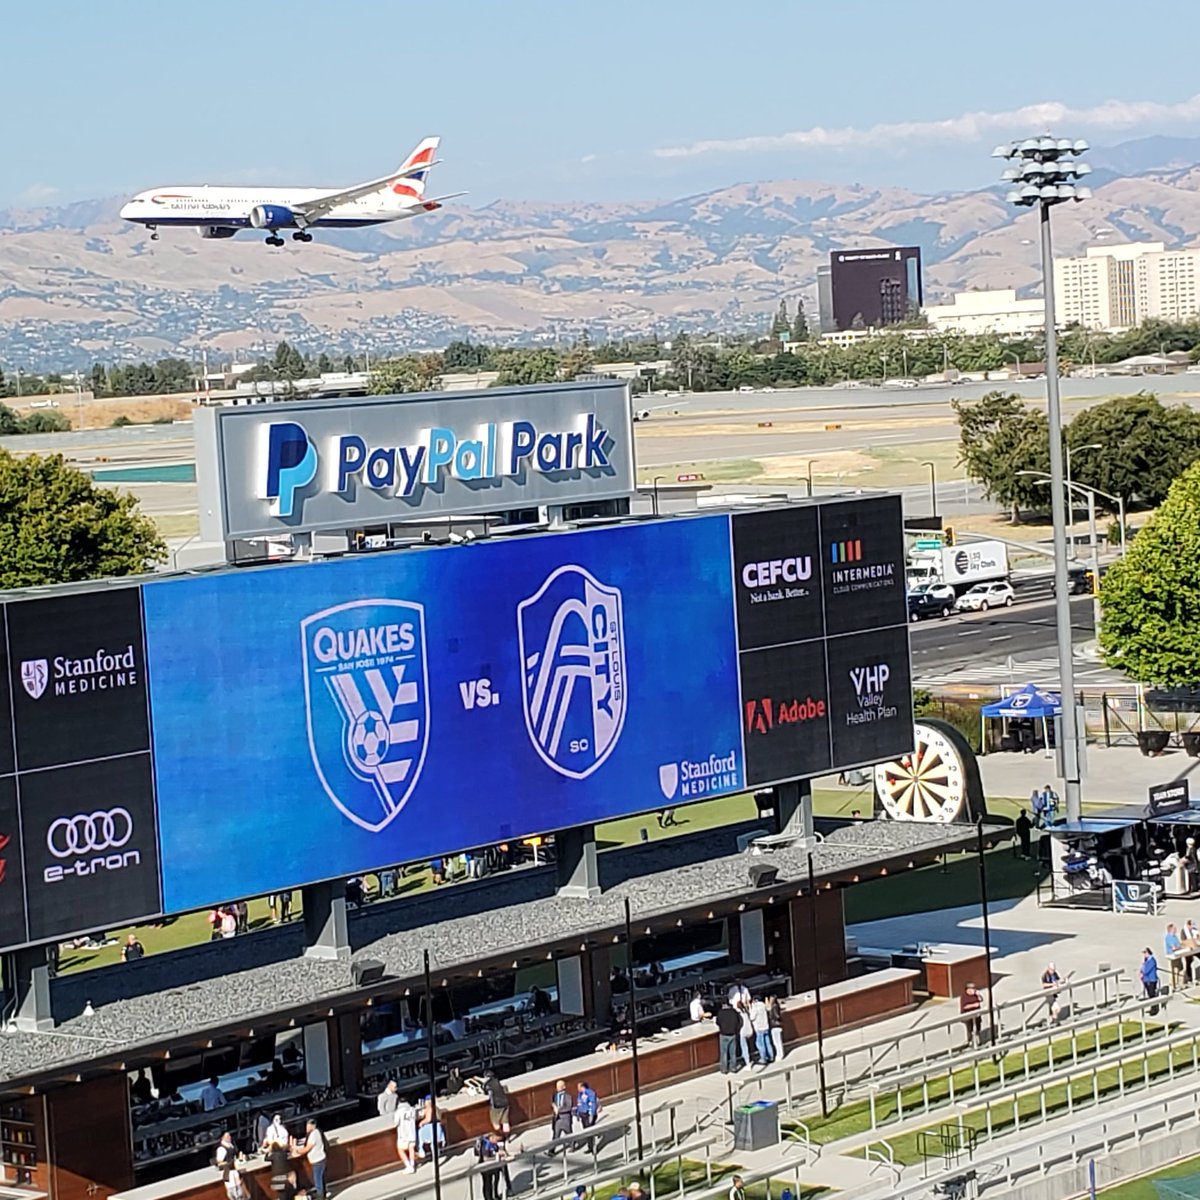 Ok, HERE we go again. County jail and government buildings at top right, plus the groovy British Airways flight from London landing across the street. Weeeeee.....
#SJvSTL #quakes74